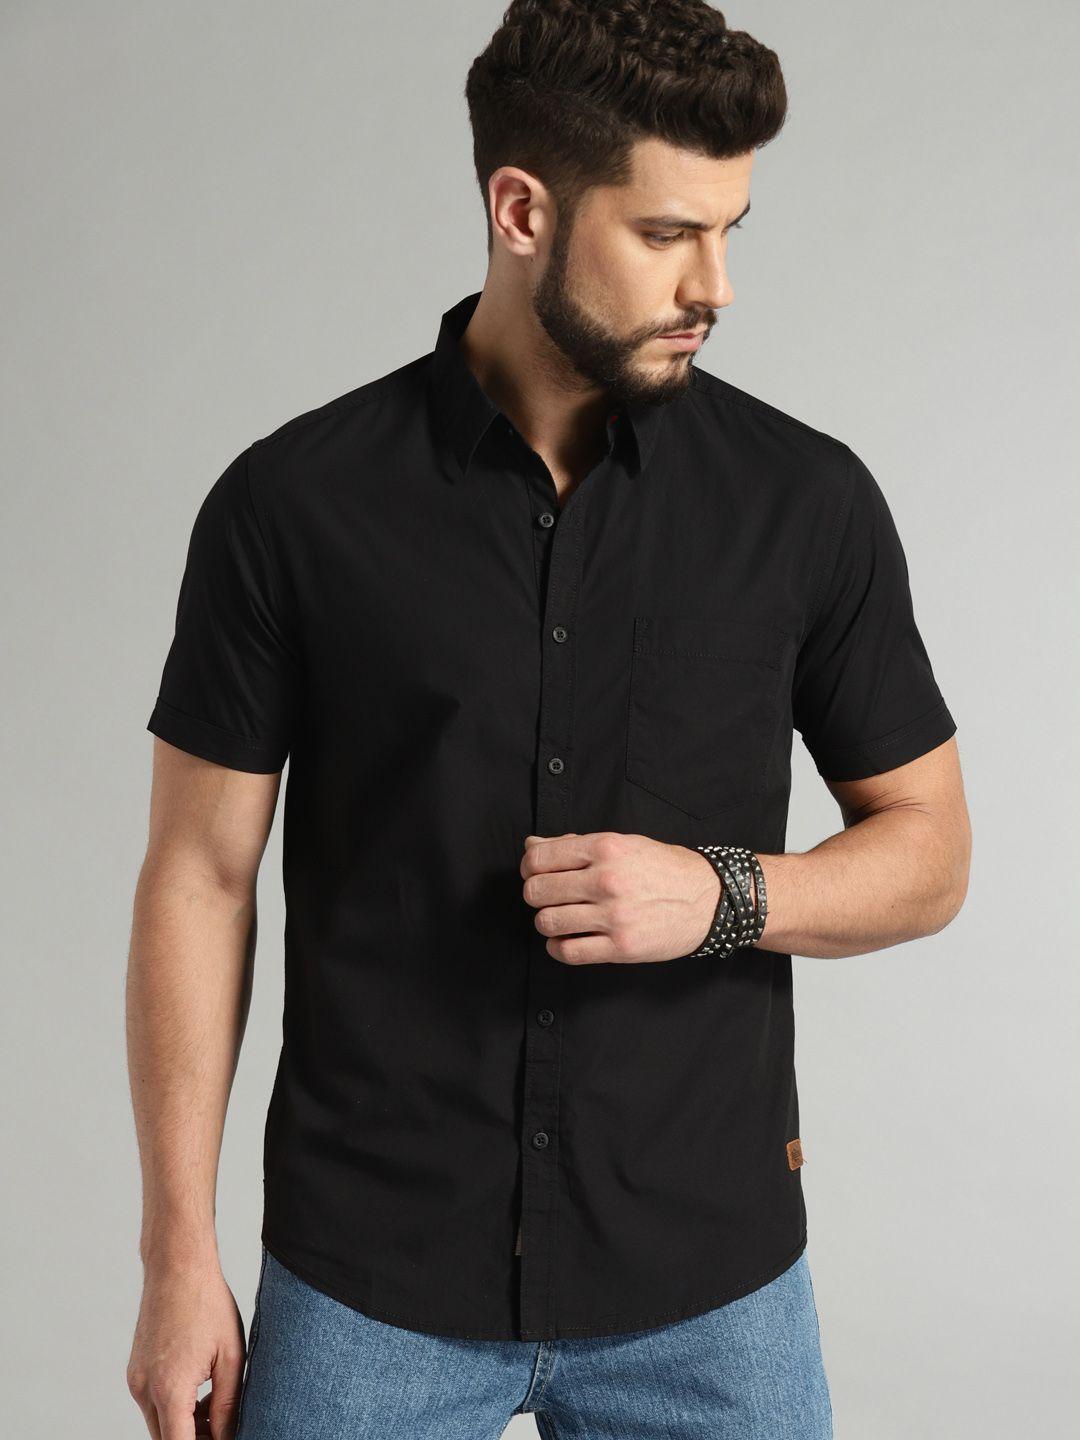 roadster-men-black-sustainable-casual-shirt